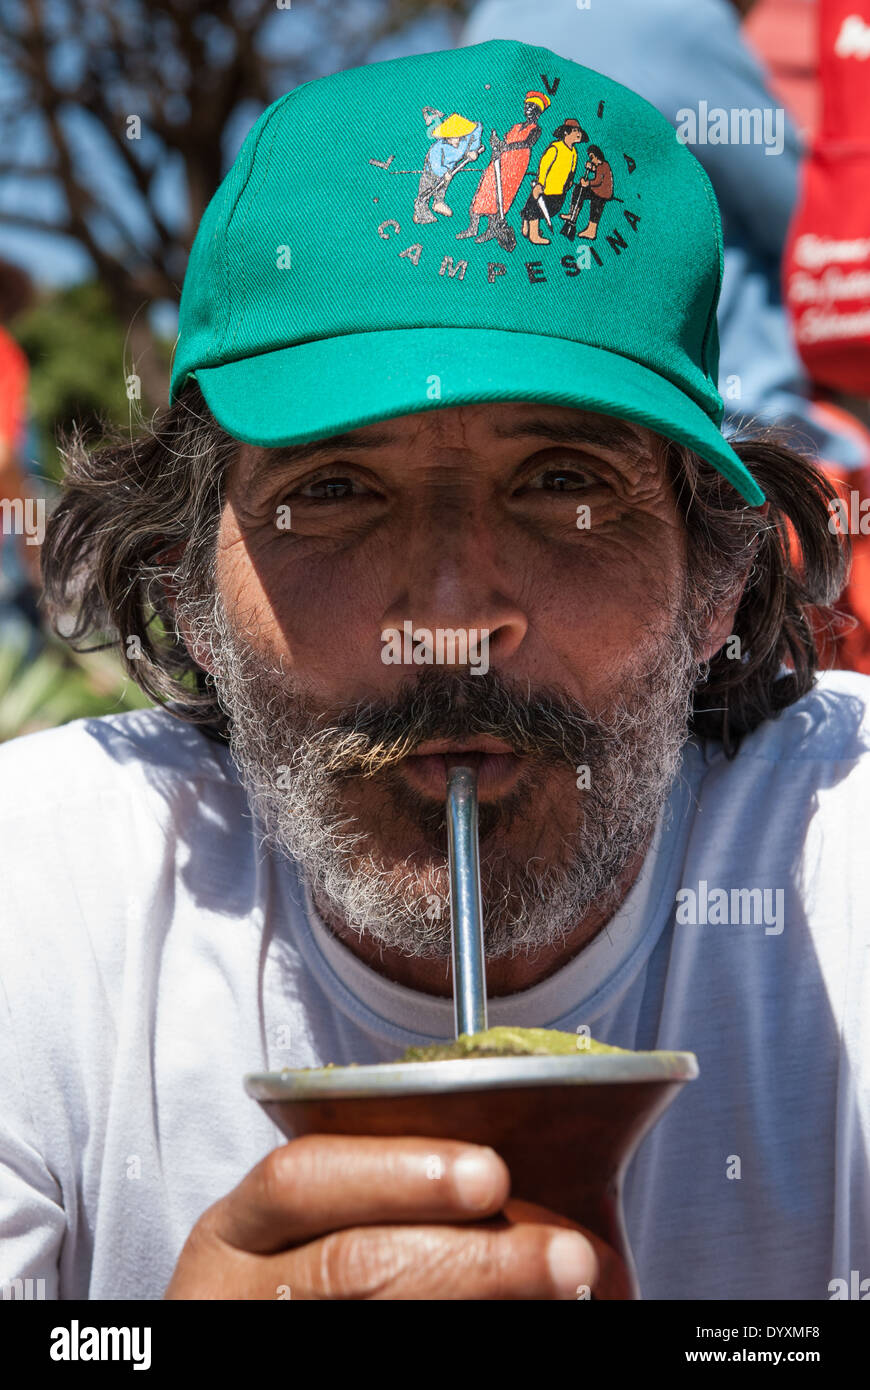 Brasilia, Brazil. Bearded demonstrator from the Via Campesina Movement with a Via Campesina baseball cap drinking Mate tea from a chimarrao. Stock Photo